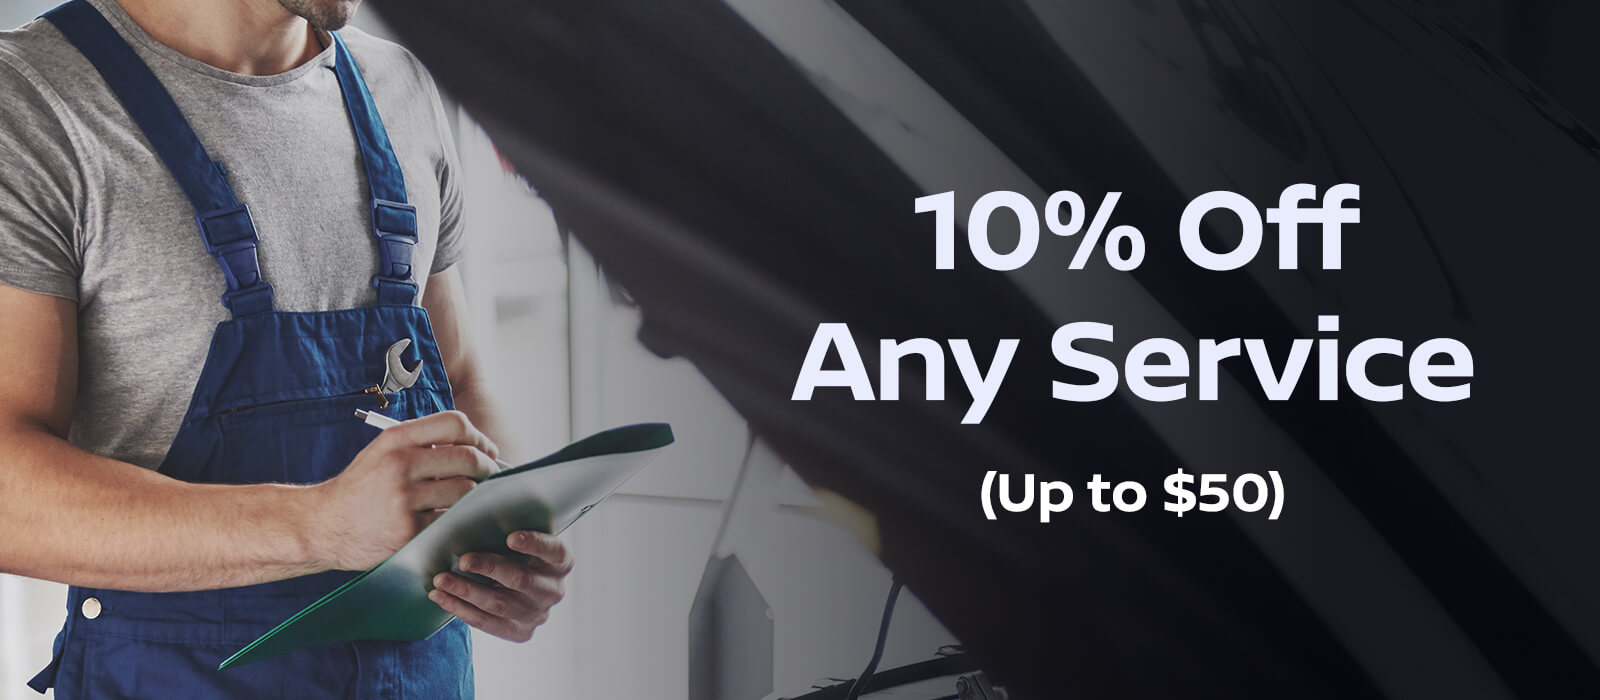 10 percent off any service up to 50 dollars